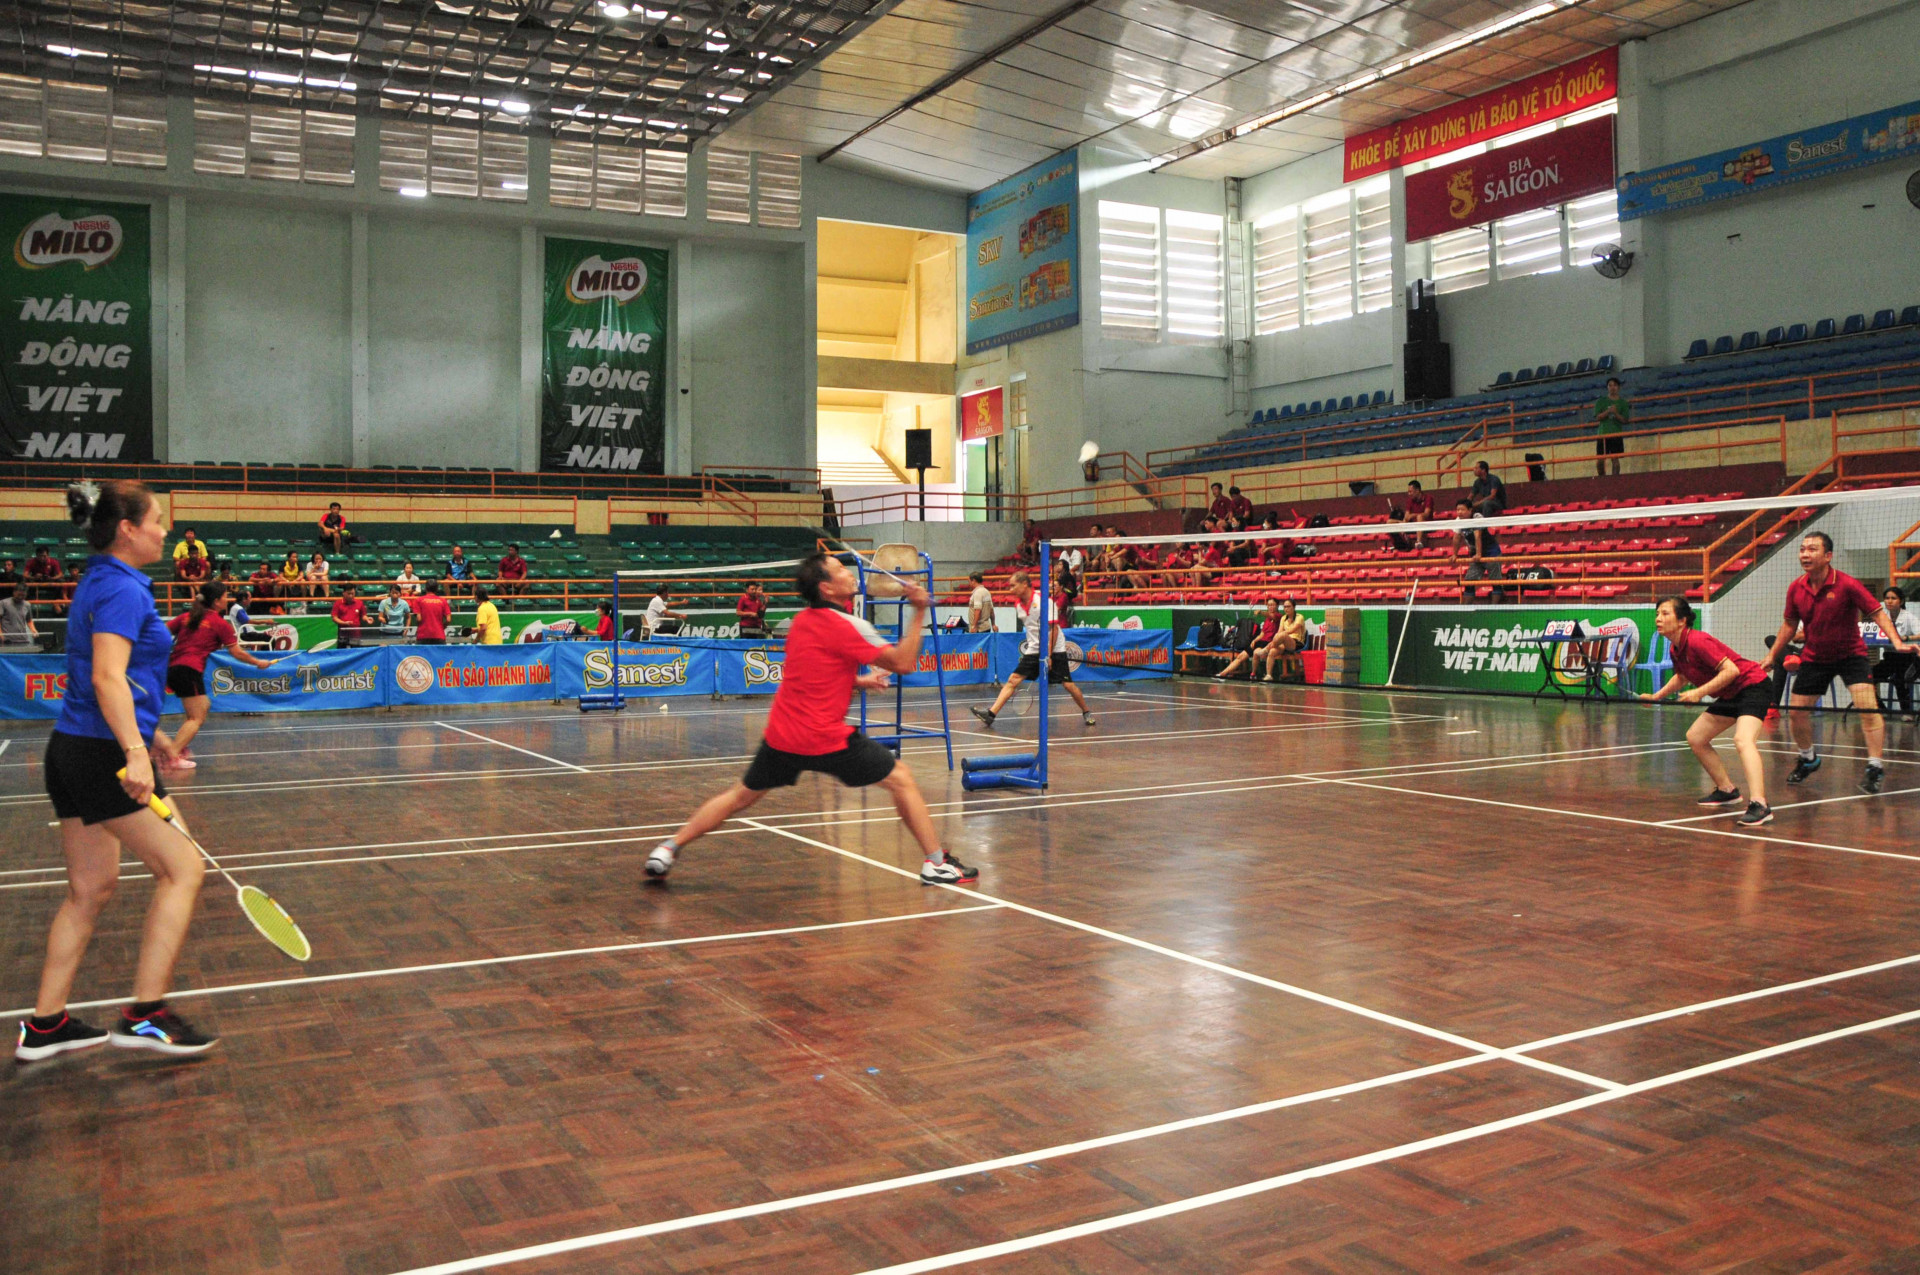 Competing in badminton